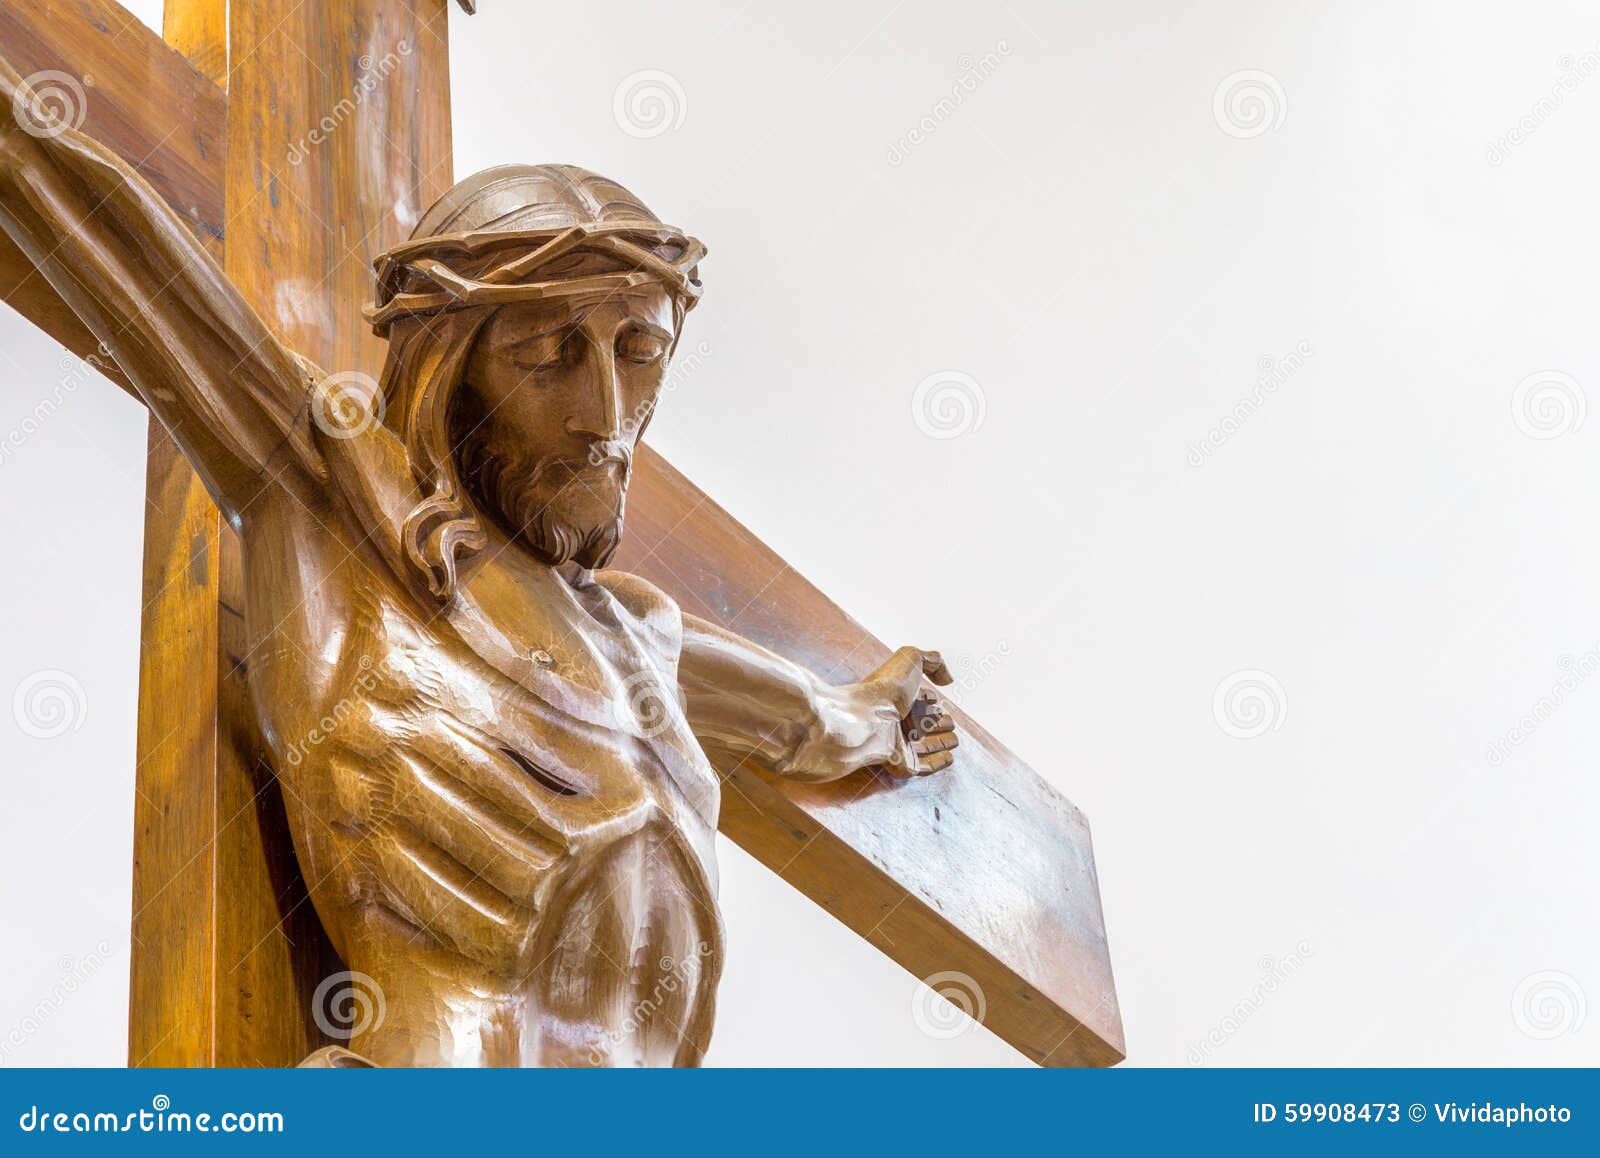 Wood Statue of the Crucifixion of Jesus Christ Stock Image - Image ...